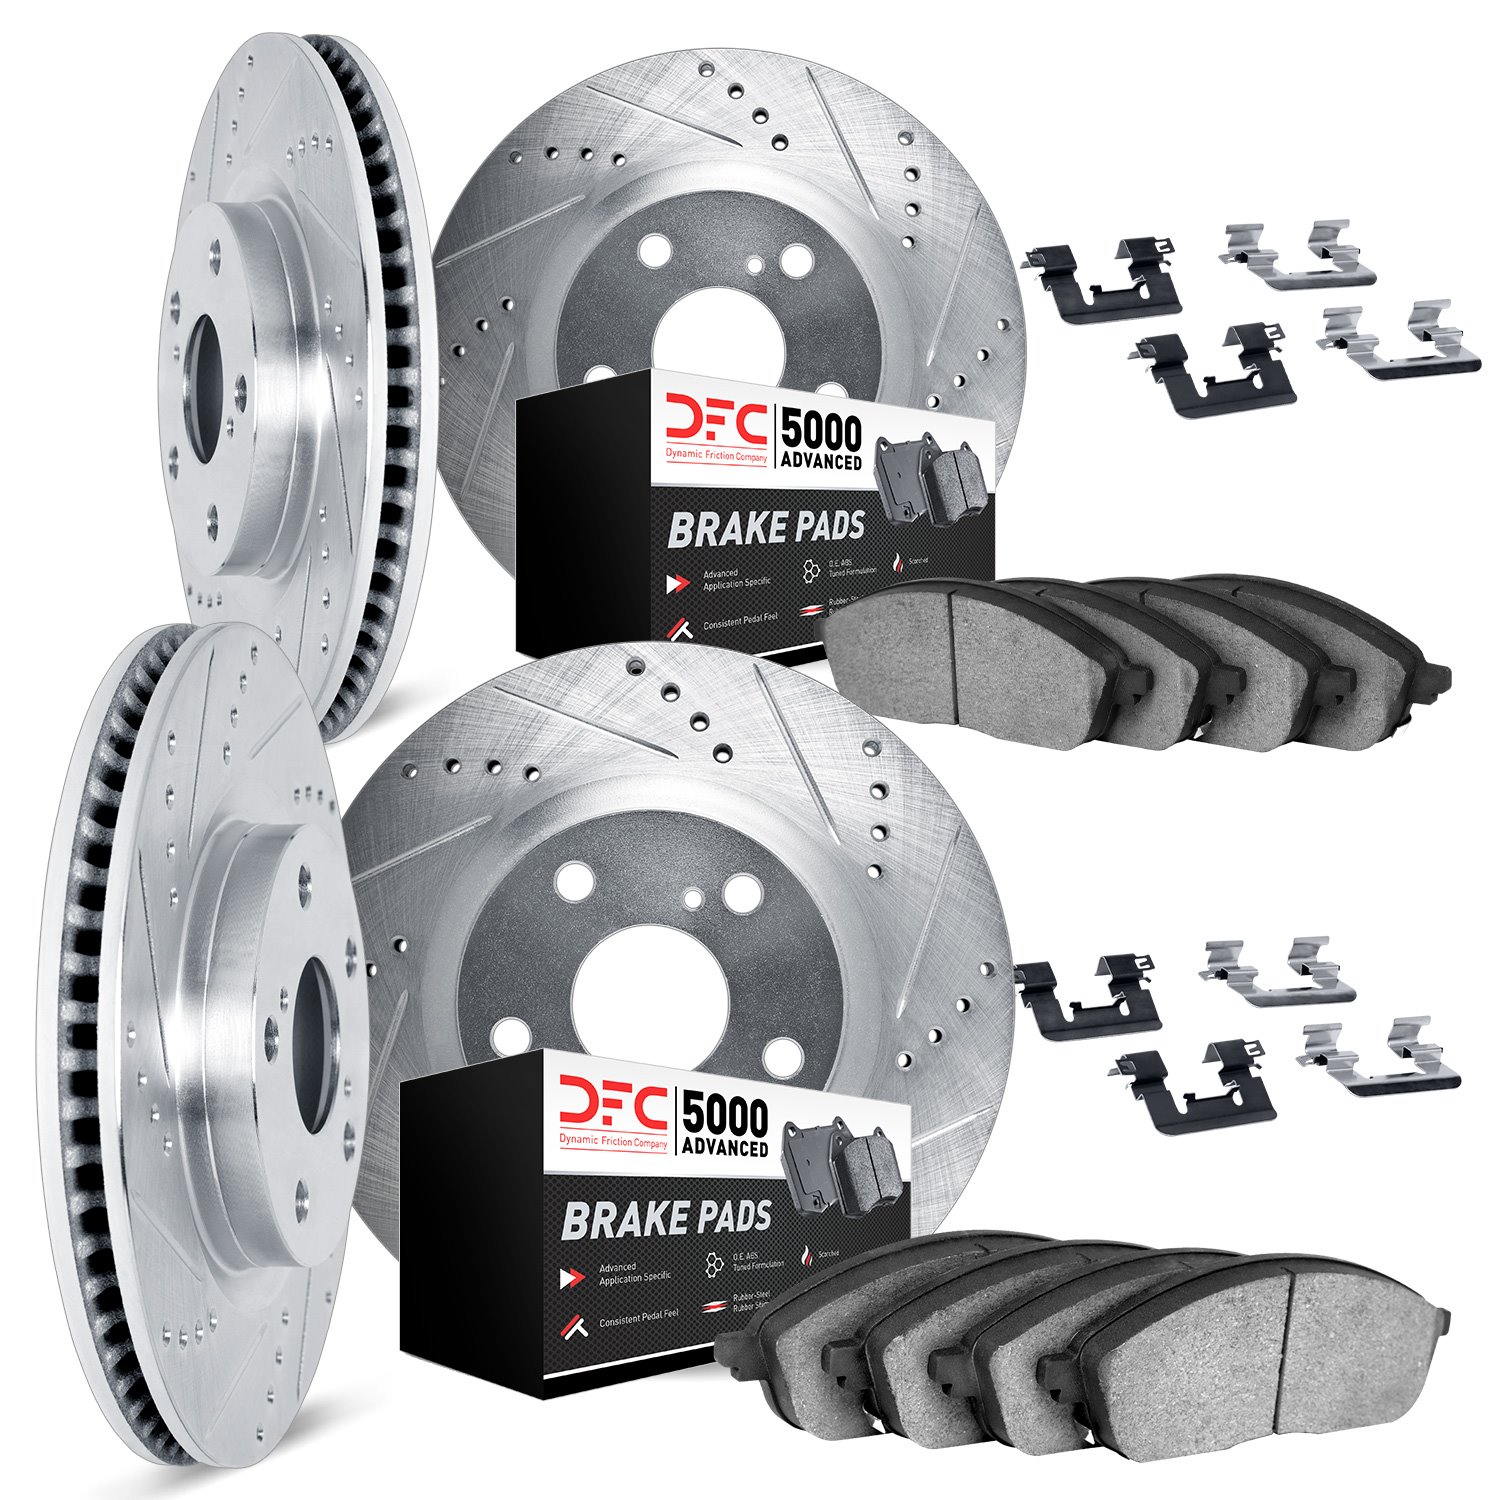 7514-31070 Drilled/Slotted Brake Rotors w/5000 Advanced Brake Pads Kit & Hardware [Silver], 2014-2019 BMW, Position: Front and R